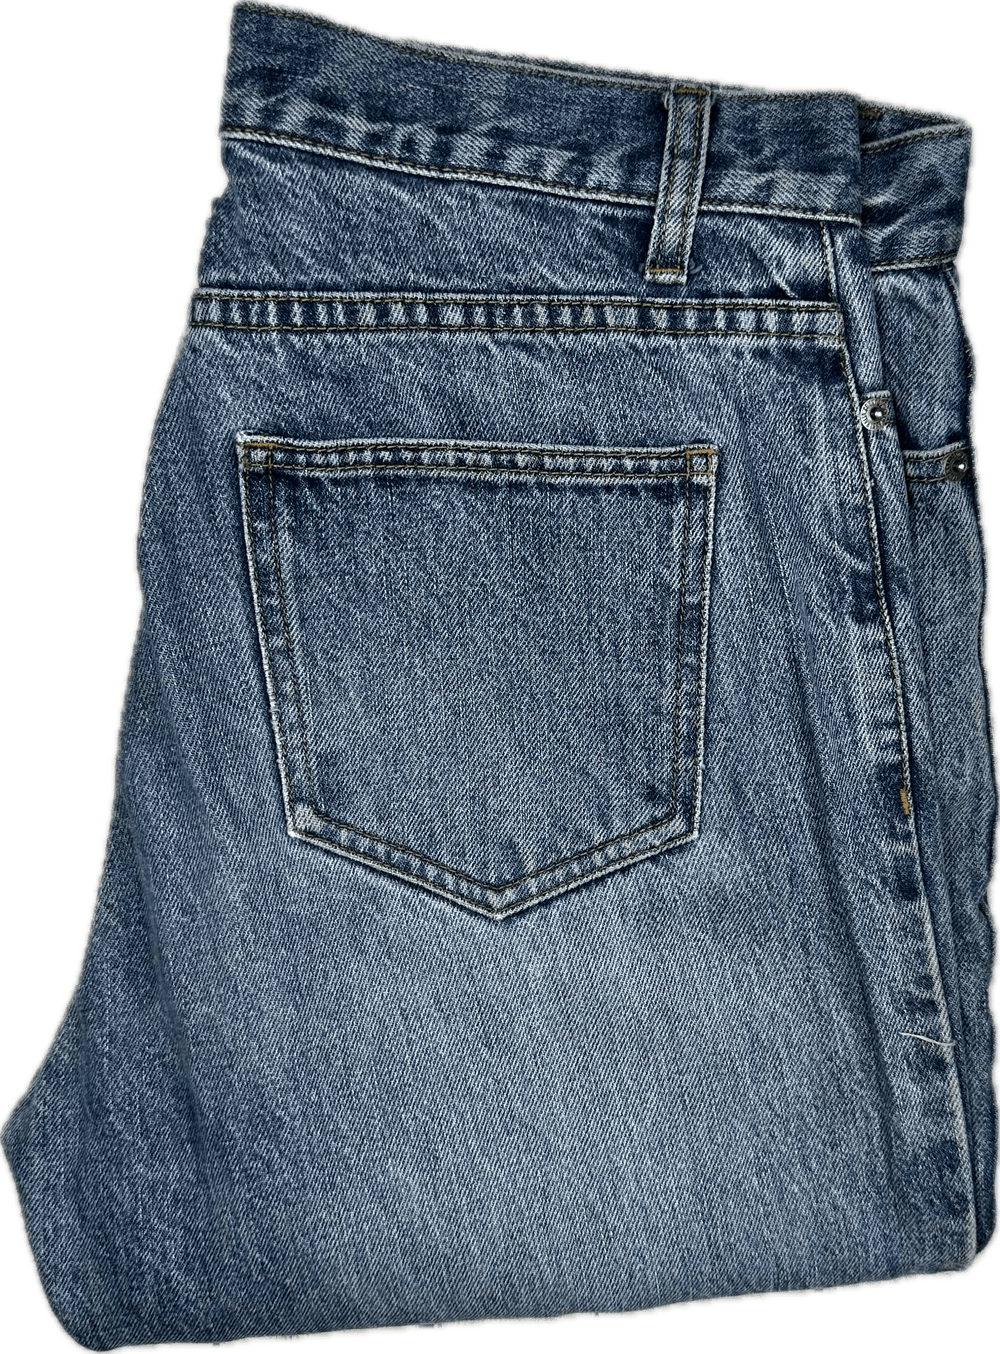 Country Road Vintage 1990's Straight Jeans- Size 12 - Jean Pool